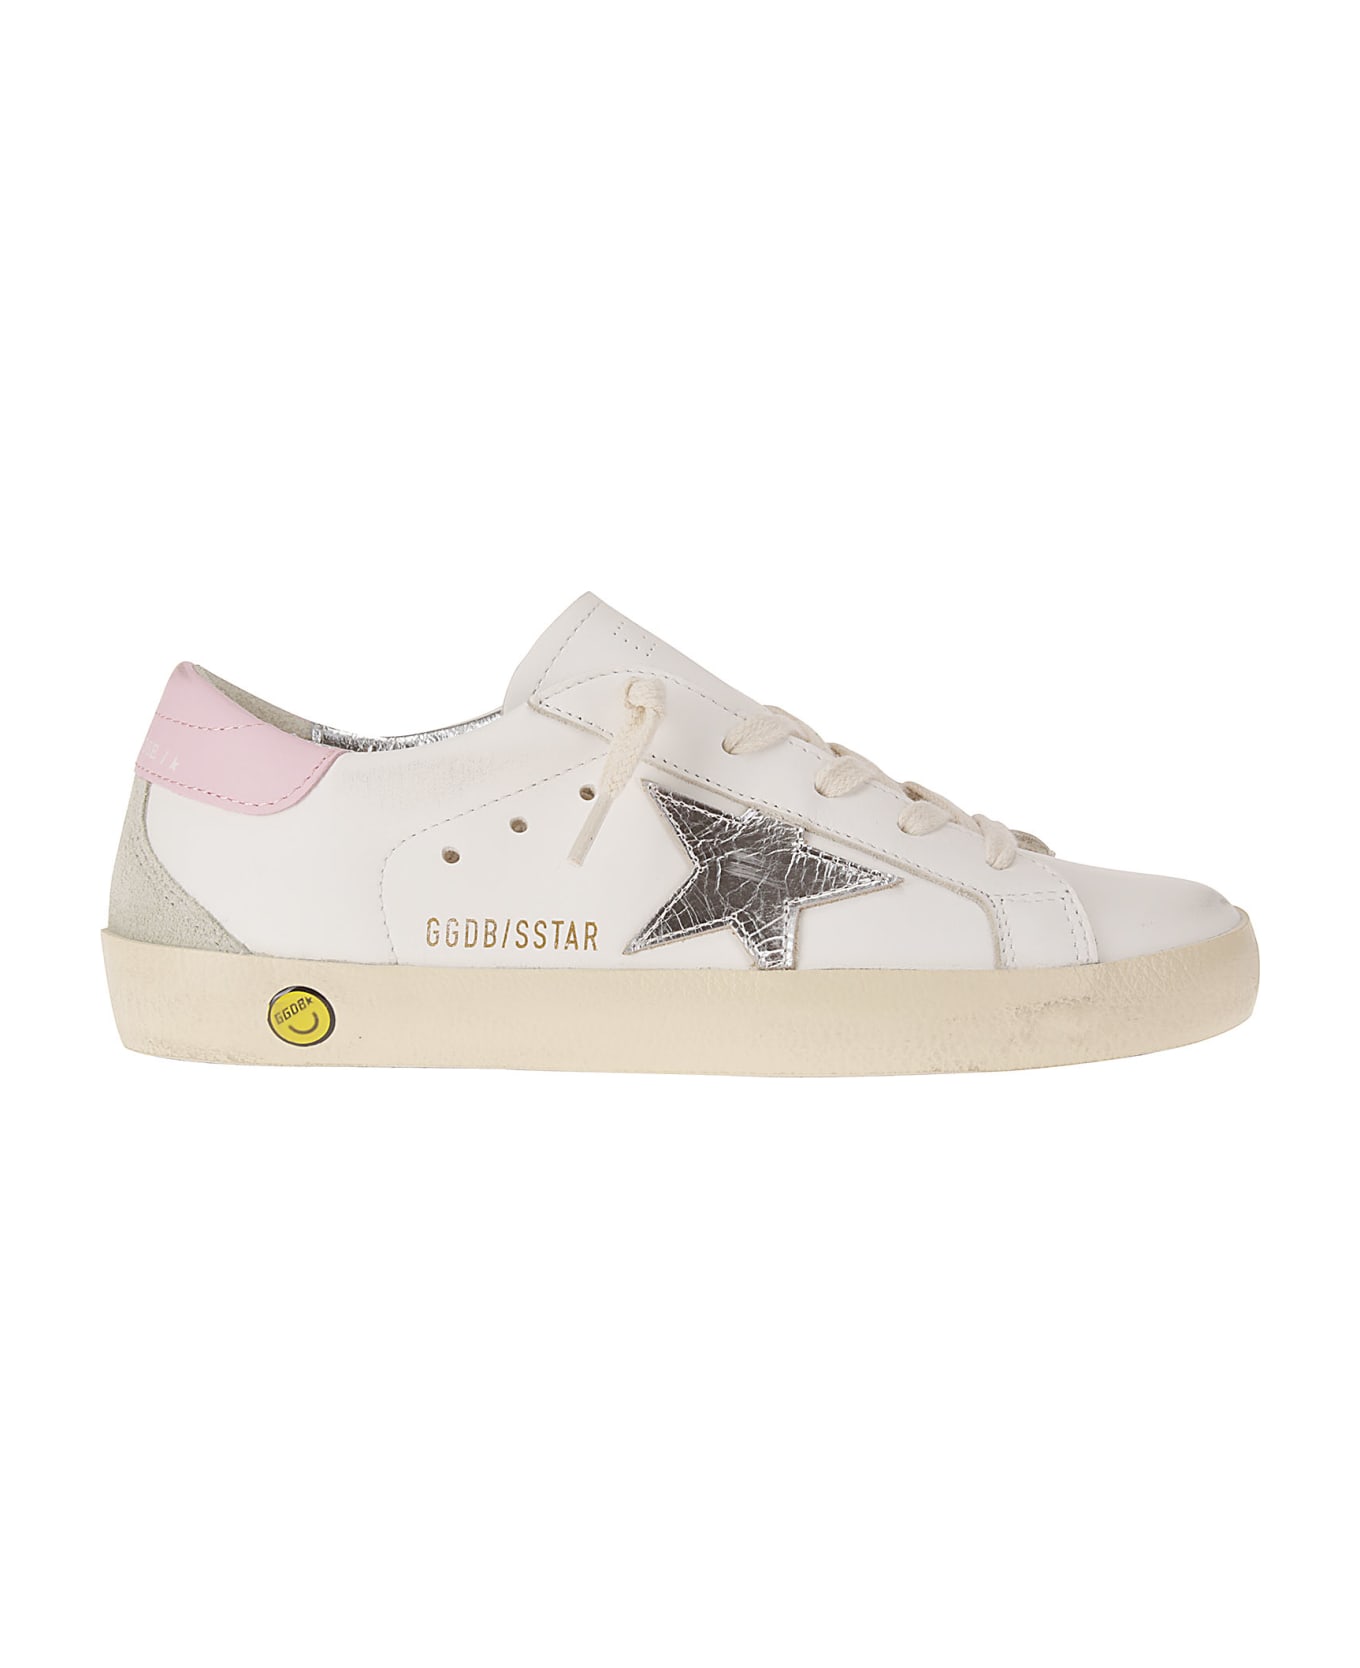 Golden Goose Super-star Leather Upper And Heel Laminated Sta - WHITE/SILVER/ICE/ORCHID PINK